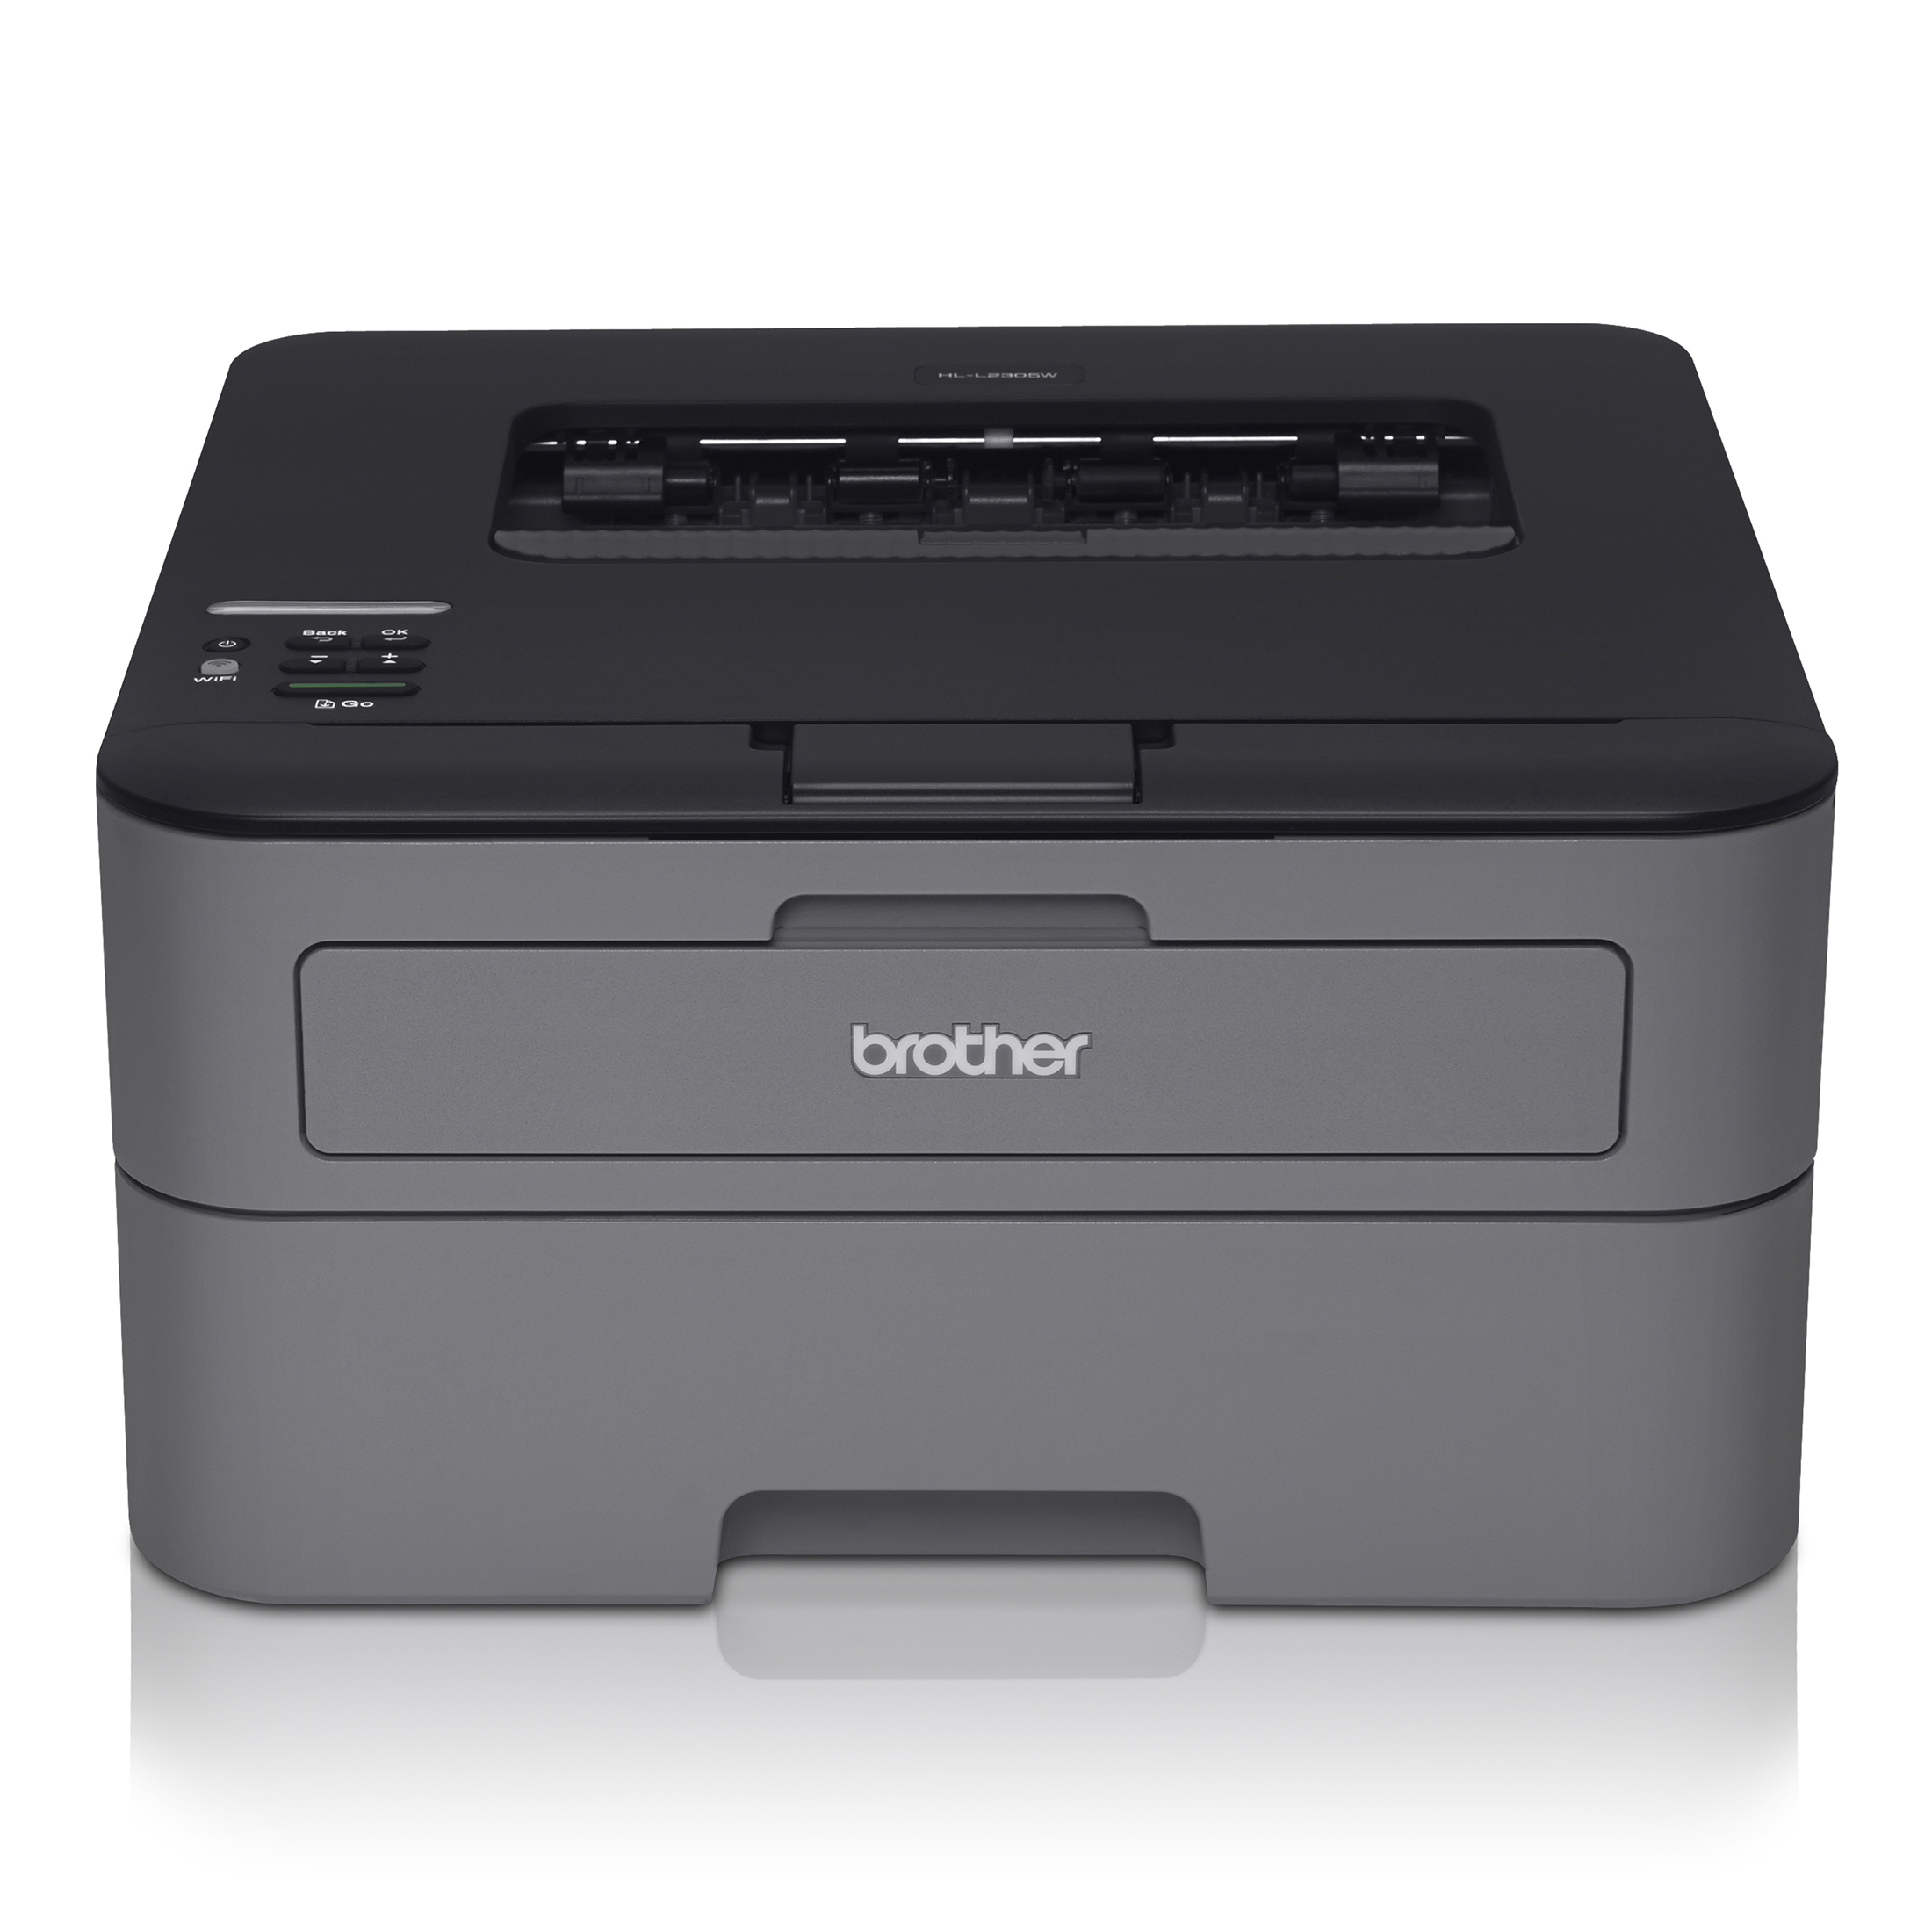 Brother HL-L2305W Compact Mono Laser Single Function Printer with Wireless and Mobile Device Printing¹, Restored - image 1 of 6